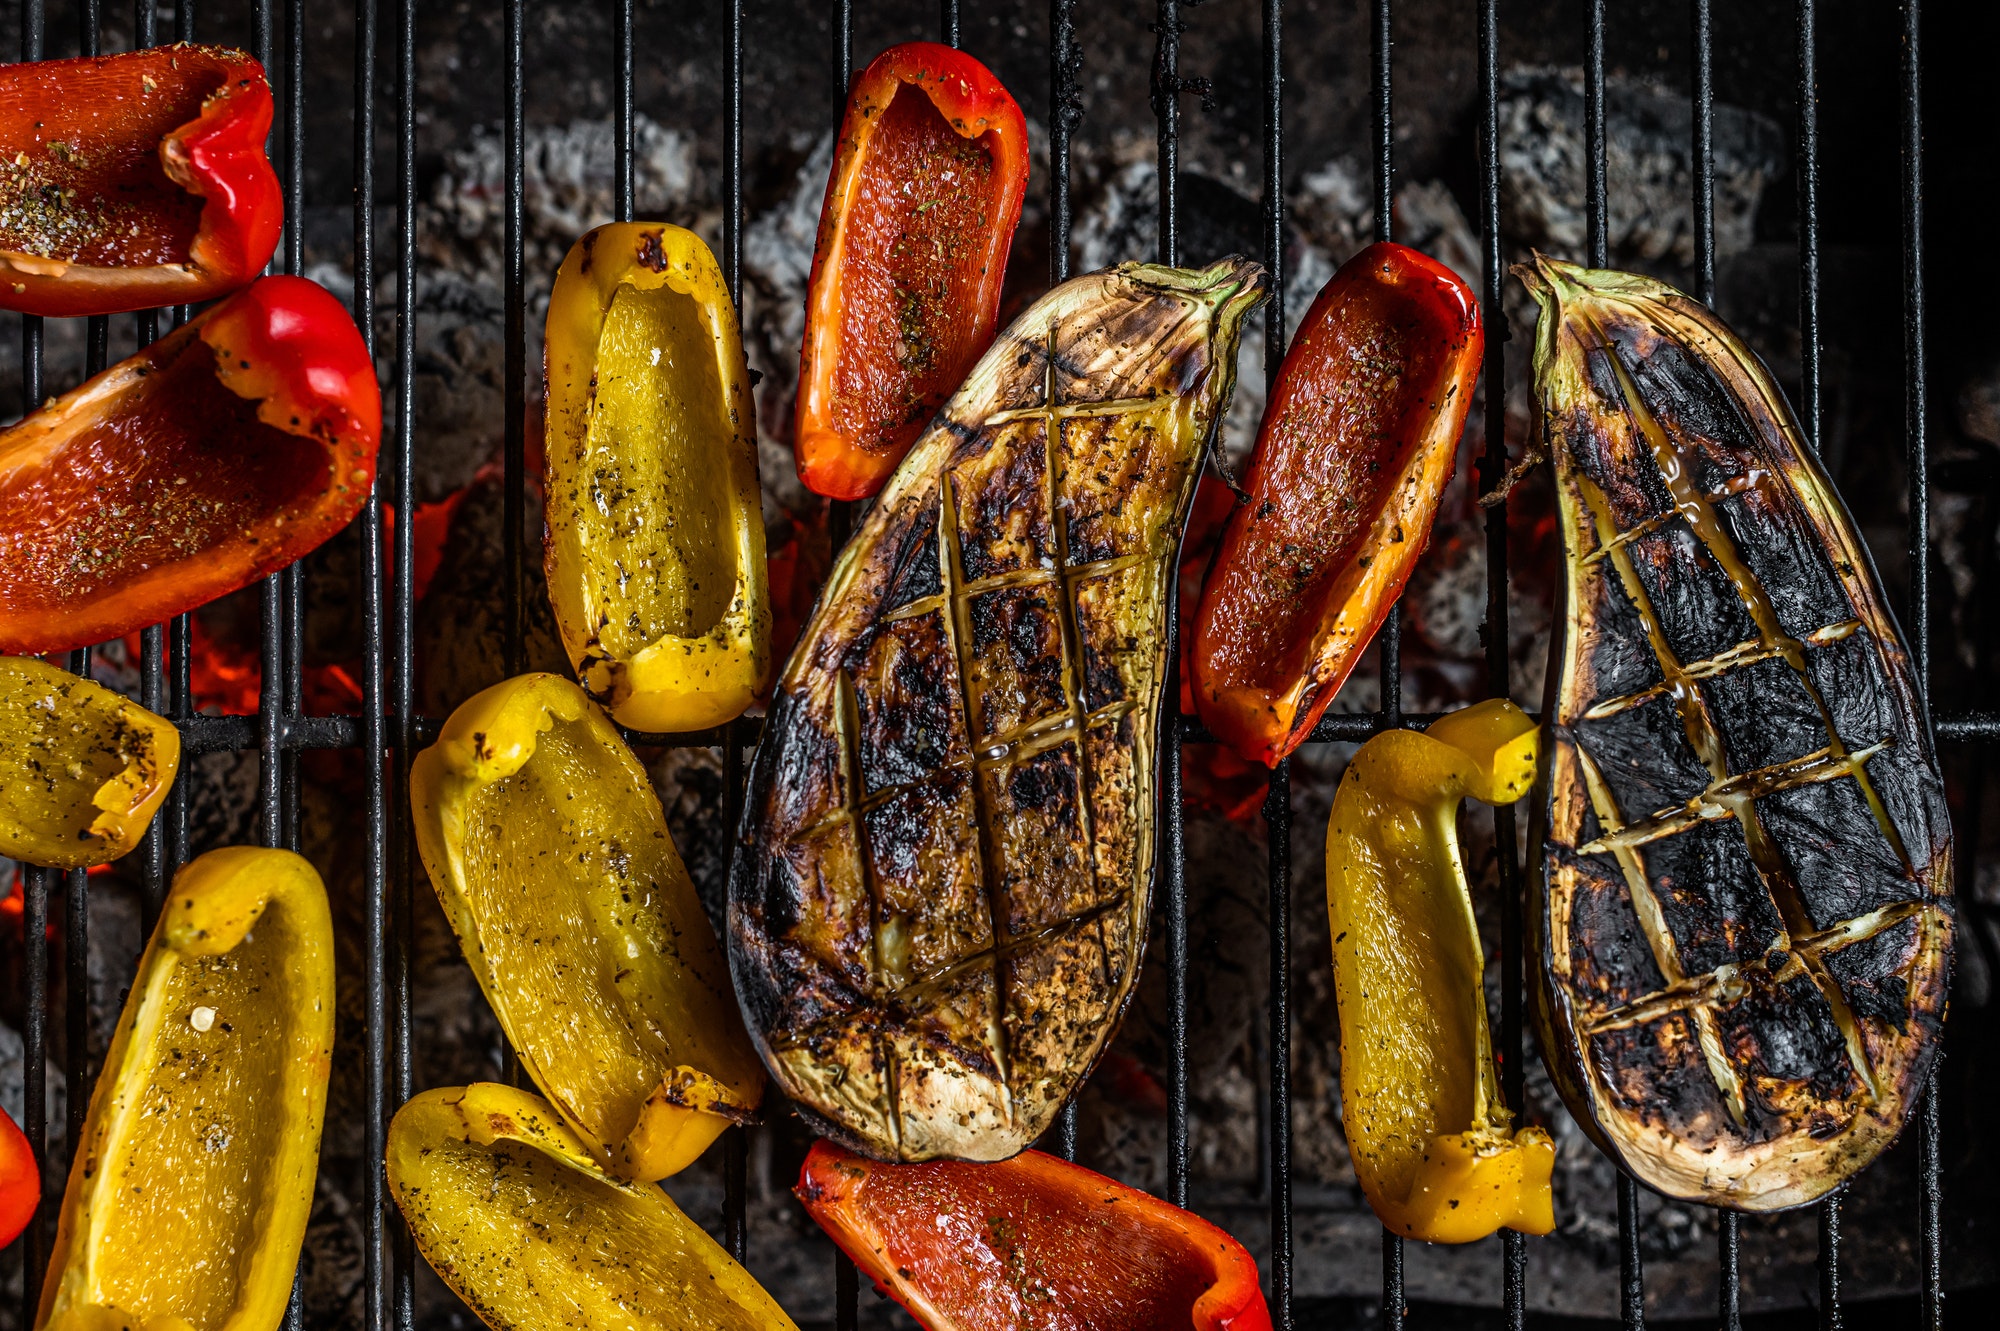 Grilled vegetables on barbecue, outdoor BBQ grill with fire. Top view